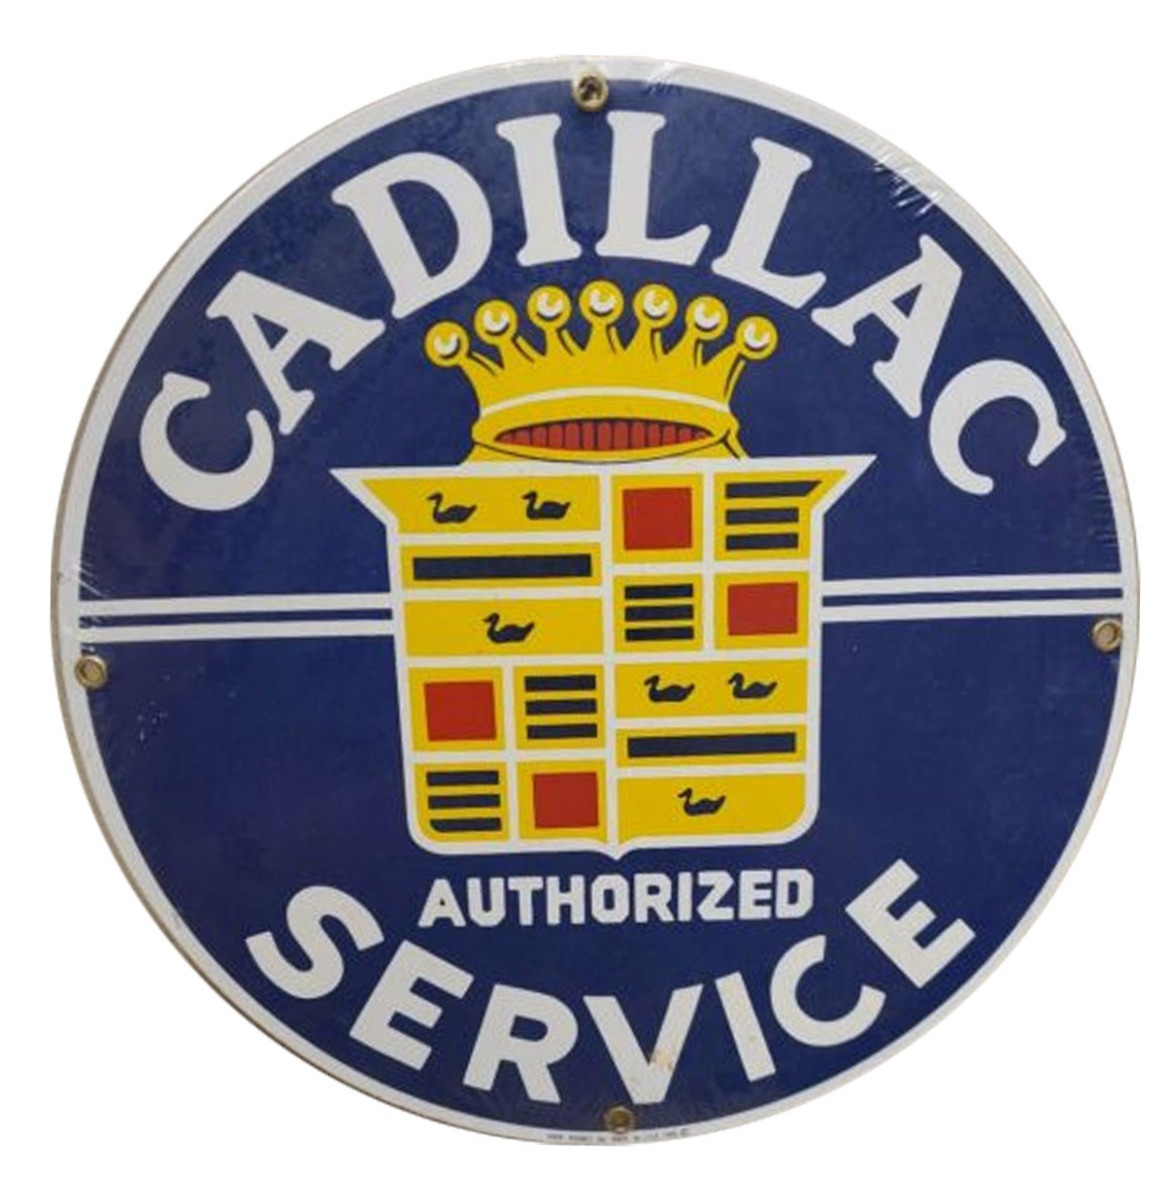 Cadillac Authorized Service Emaille Bord - 29 cm ø - Ande Rooney 1990&apos;s